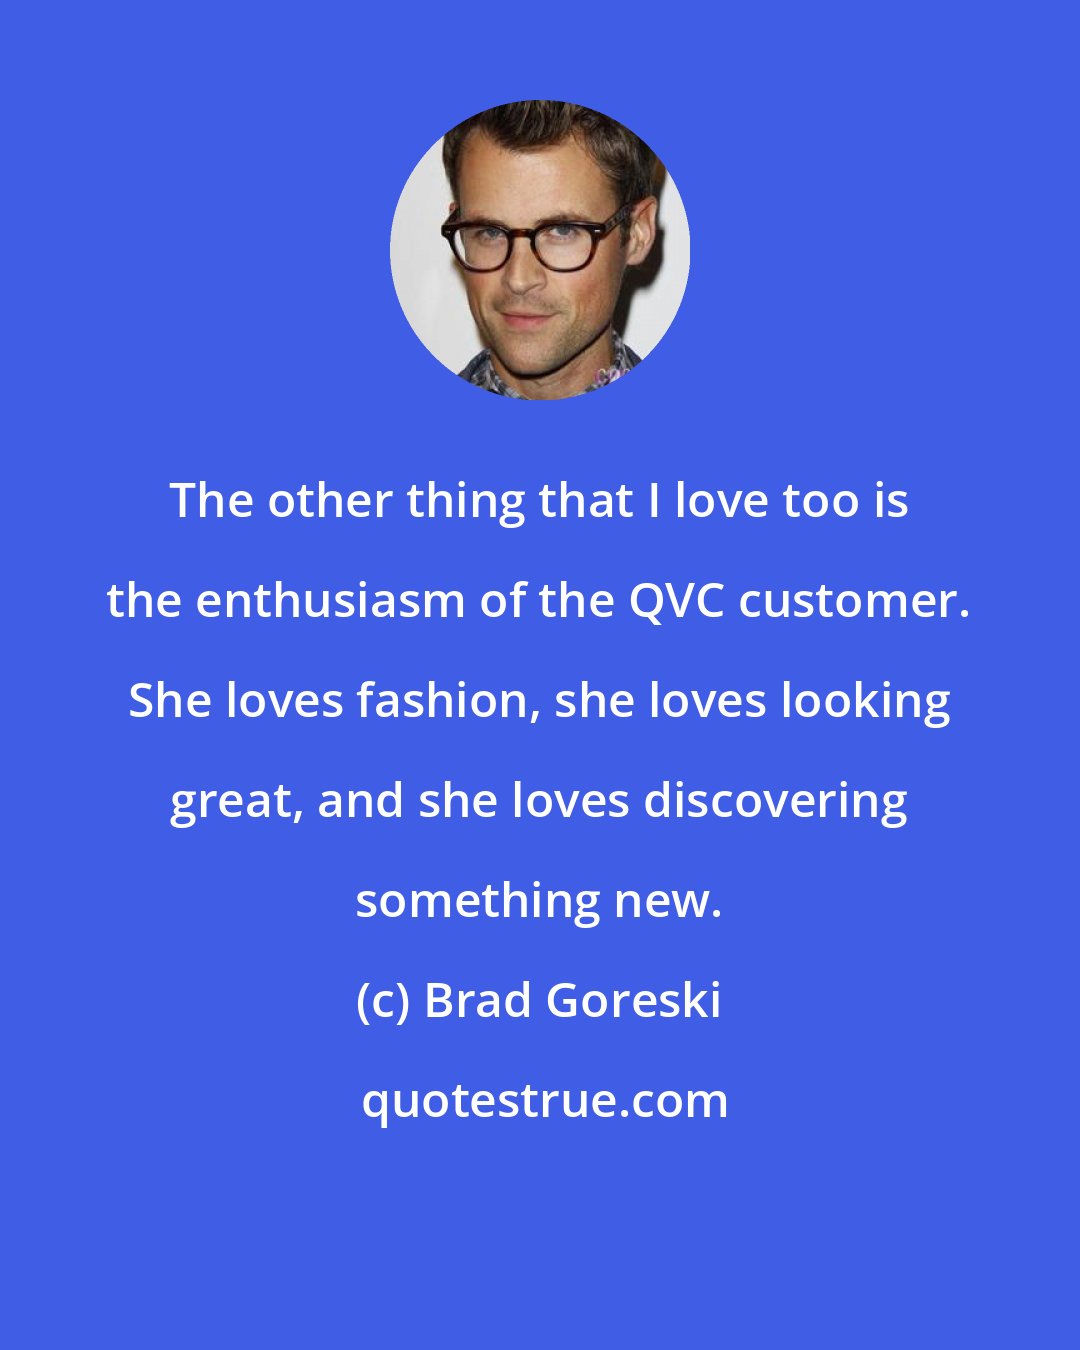 Brad Goreski: The other thing that I love too is the enthusiasm of the QVC customer. She loves fashion, she loves looking great, and she loves discovering something new.